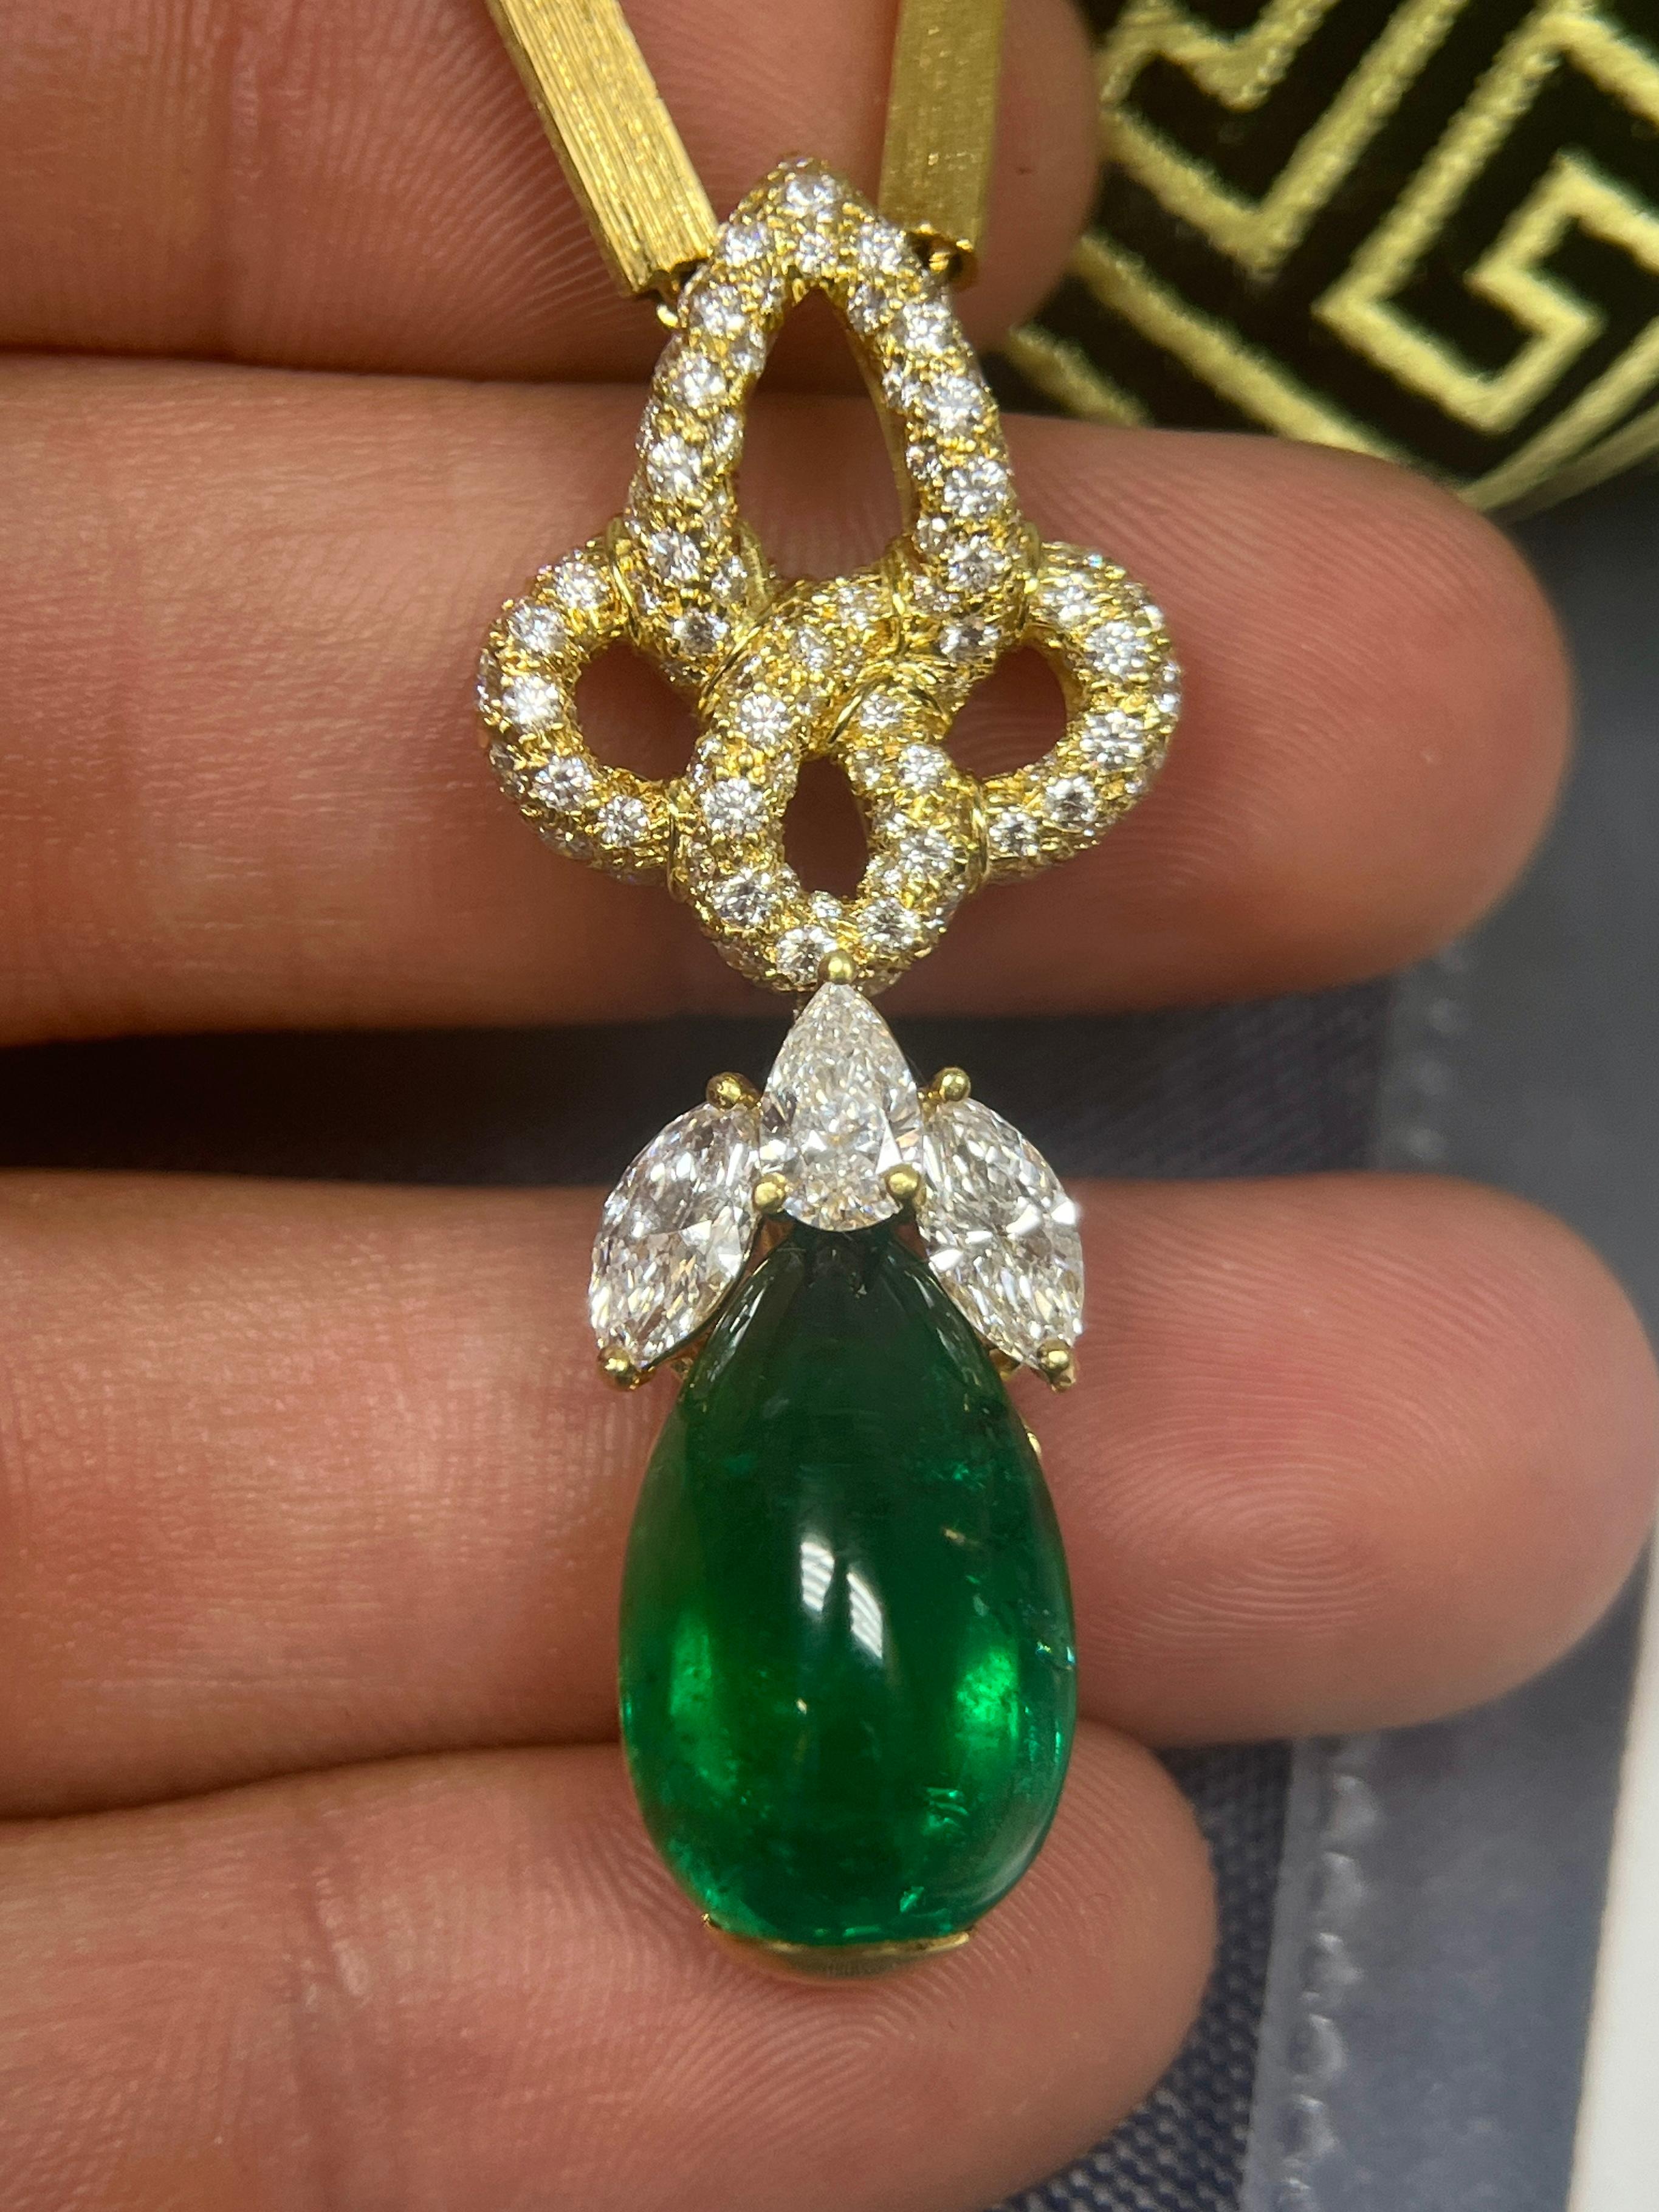 Henry Dunay signed natural cabochon cut emerald and mixed cut diamond pendant necklace. Set in 18k solid yellow gold, with a fancy link chain and lobster clip closure. Certified by GIA and AGL. Two certificates from the most well-respected